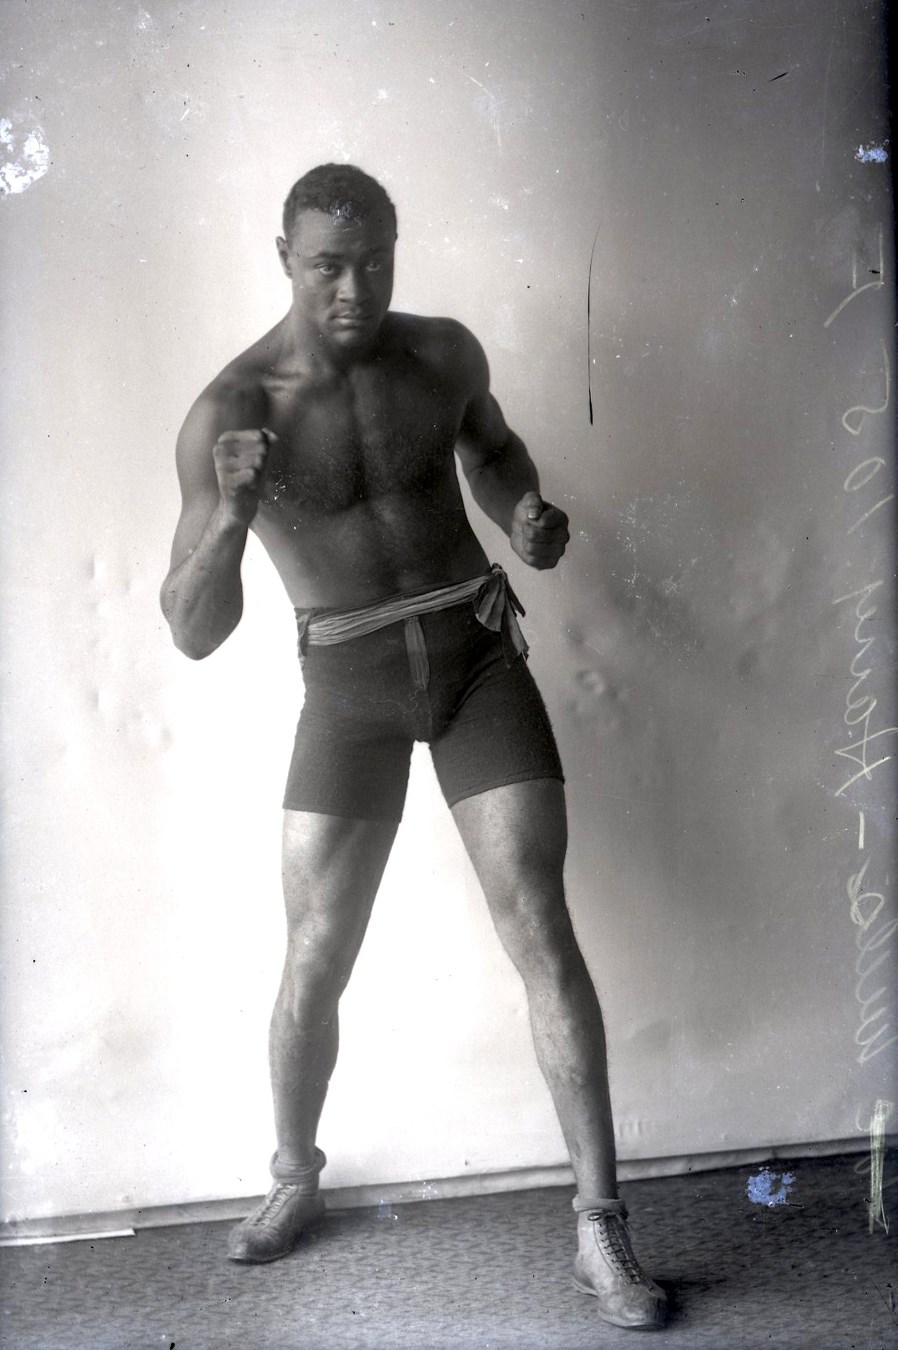 1910s Harry Wills "Black Panther" Boxing Pose Type I Glass Plate Negative by Dana Studio